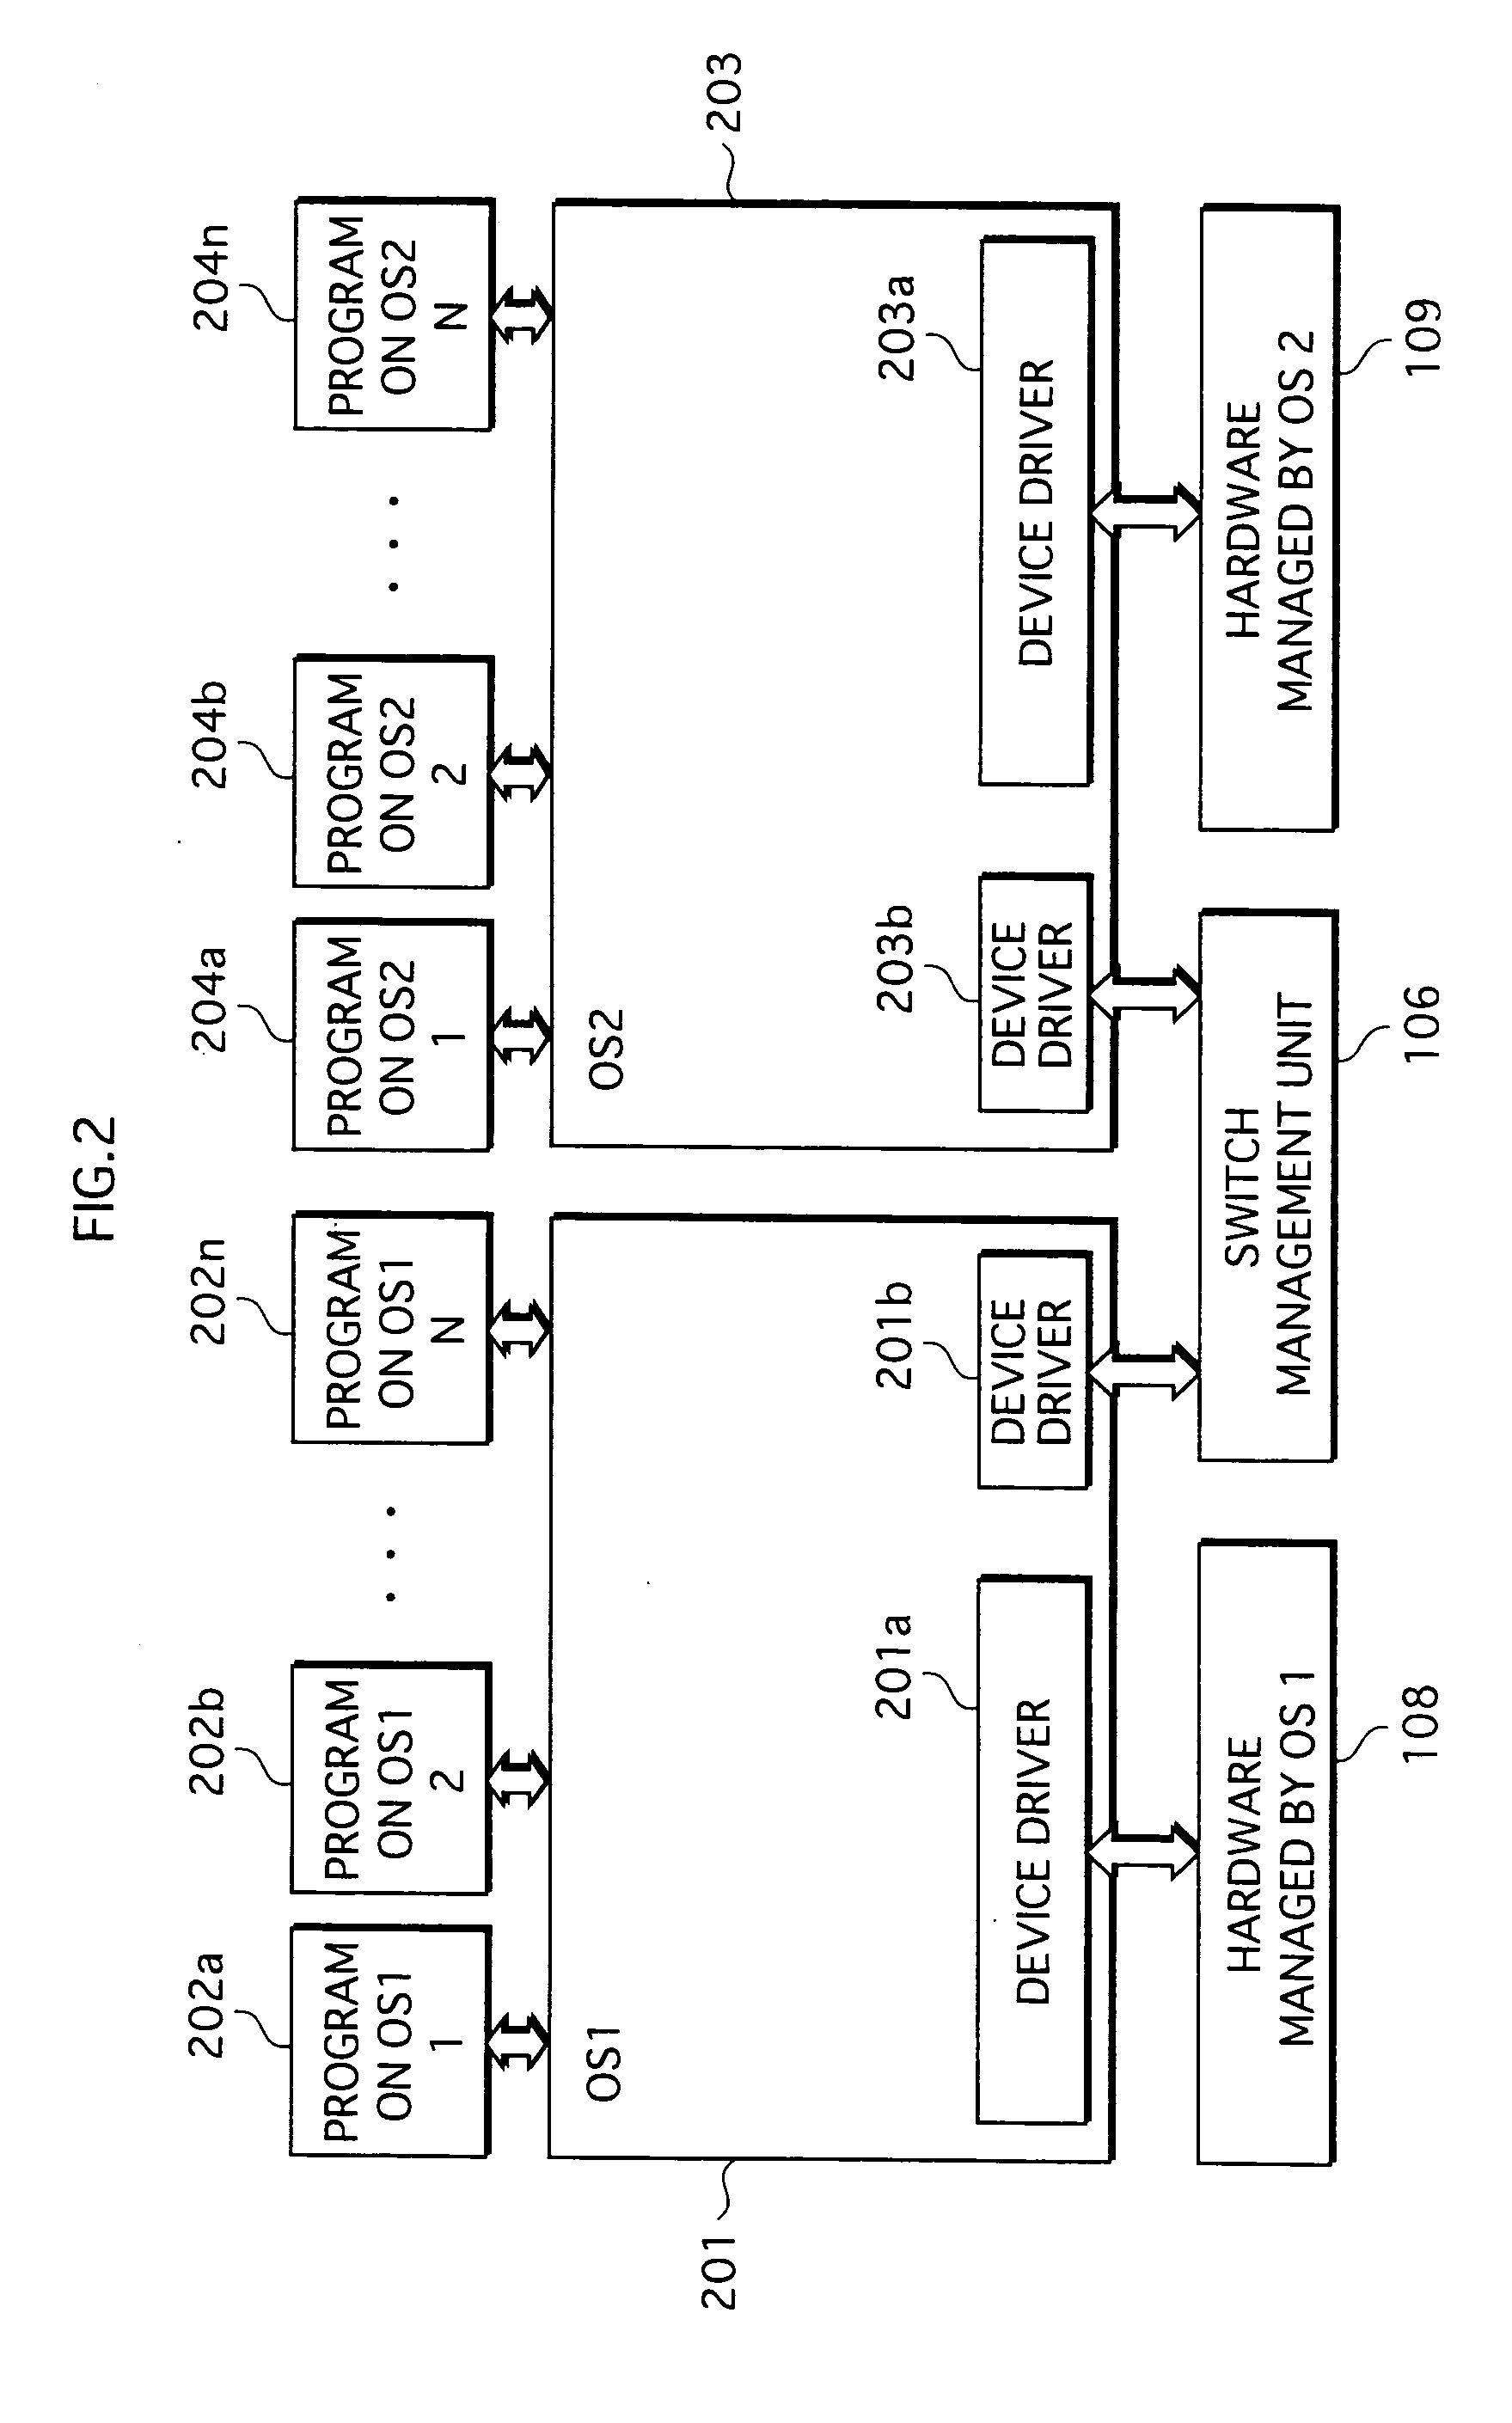 Information processing apparatus operable to switch operating systems